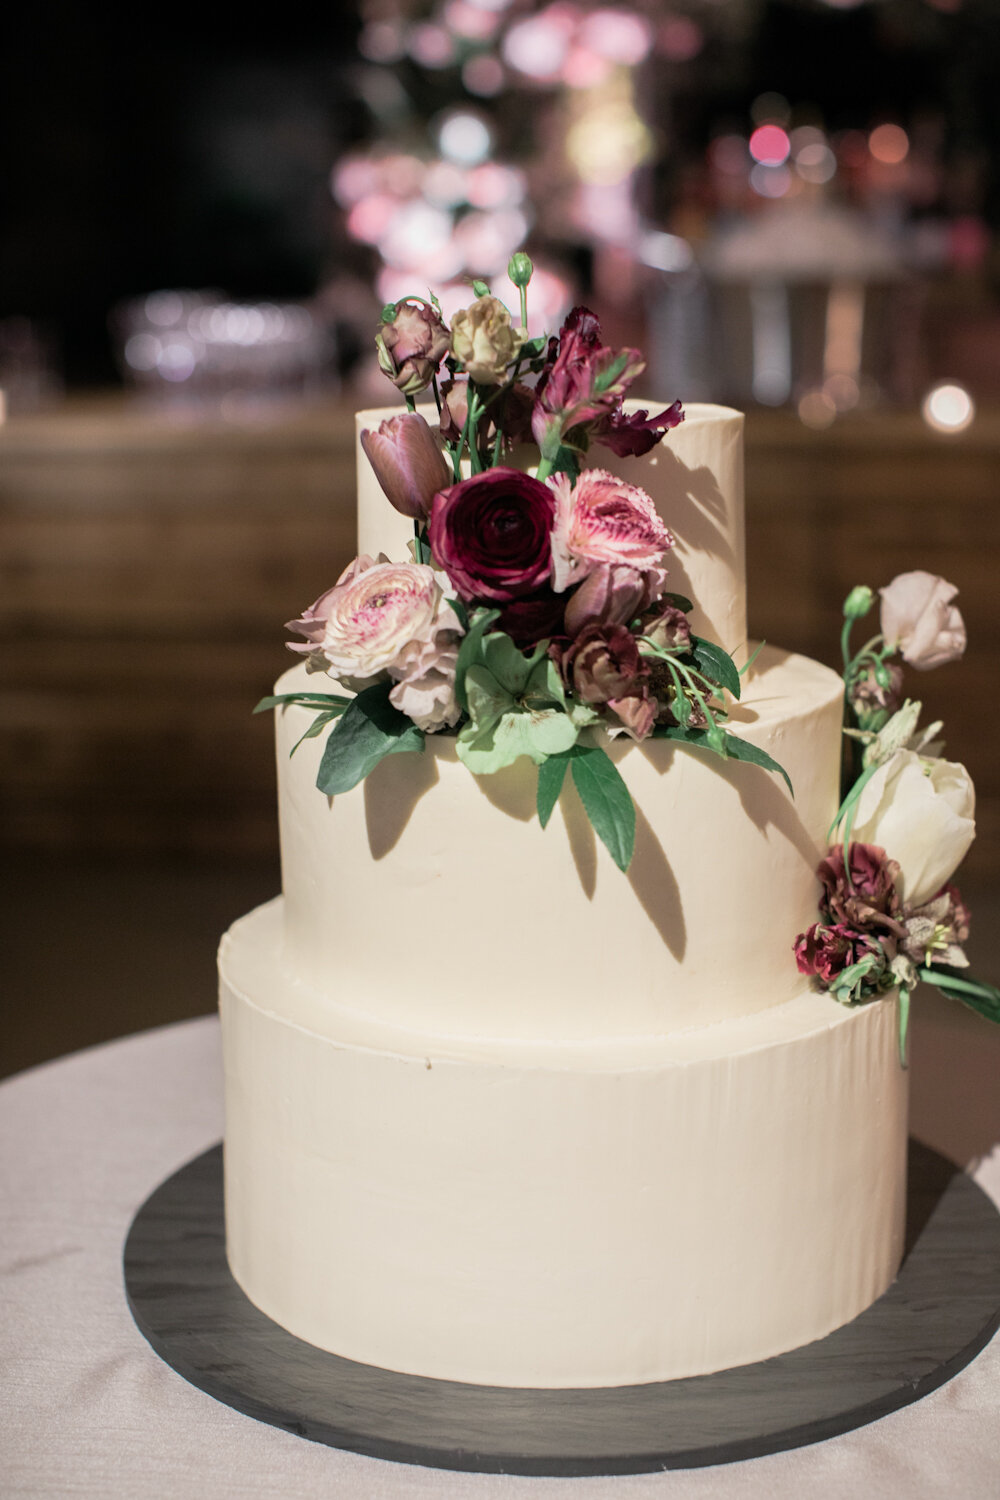 Blue Hill at Stone Barns wedding cake in buttercream with fresh flowers